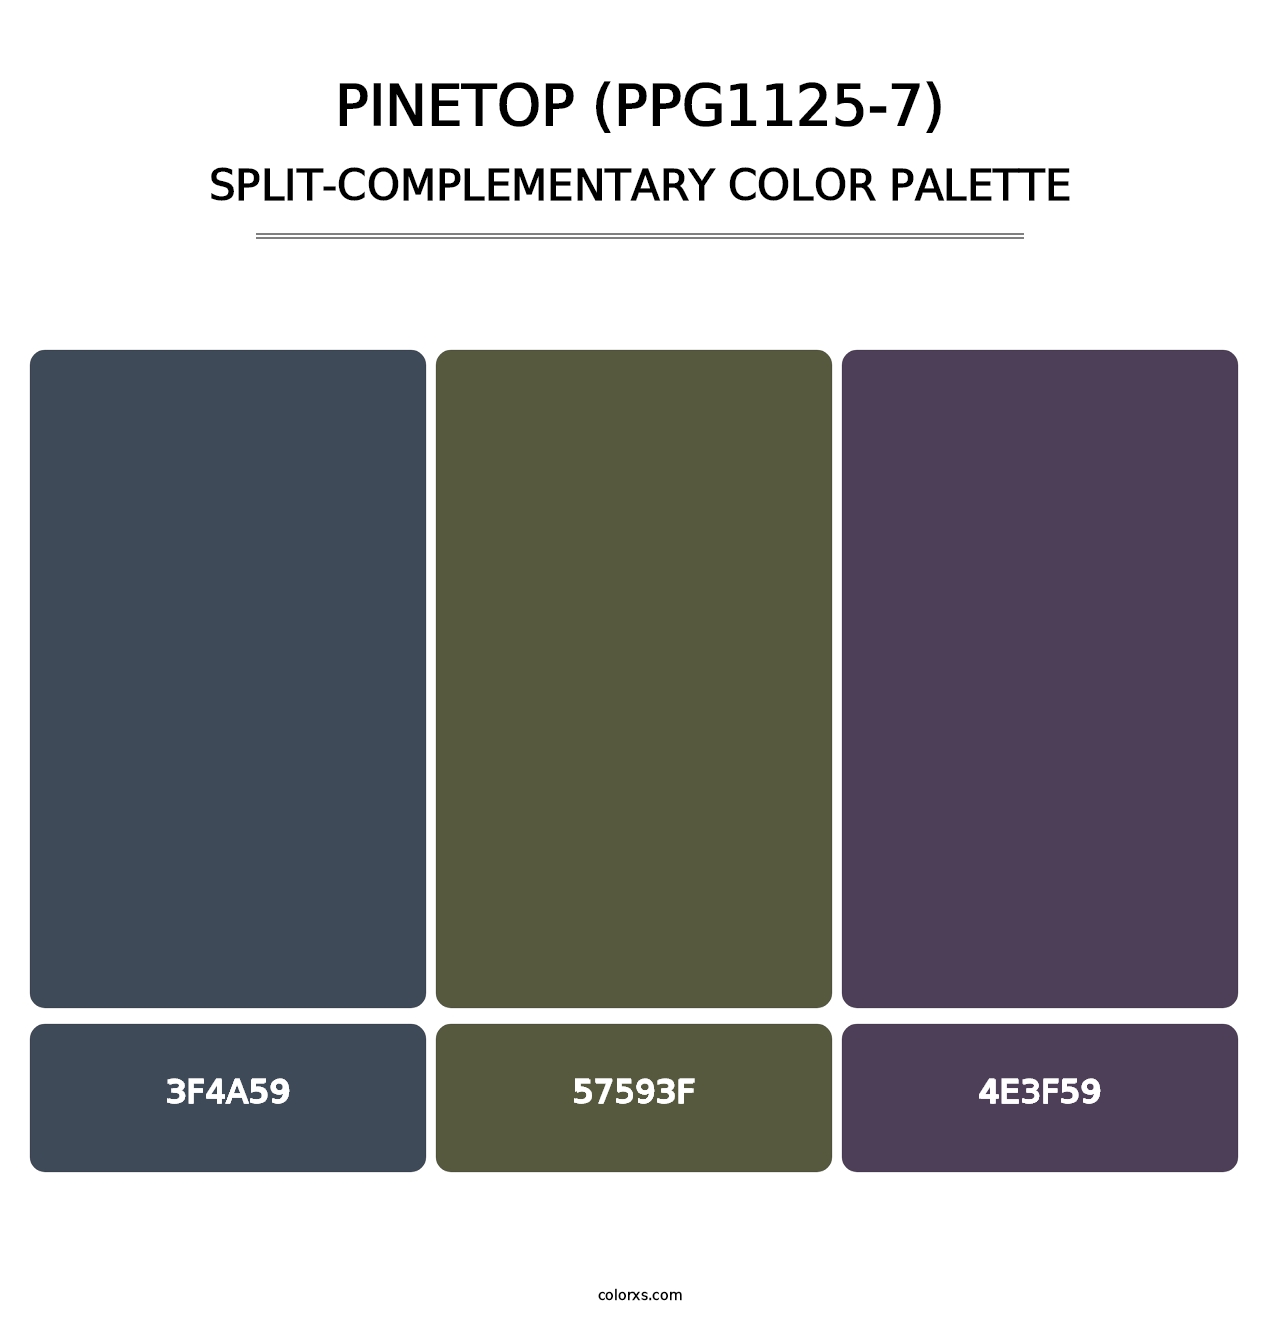 Pinetop (PPG1125-7) - Split-Complementary Color Palette